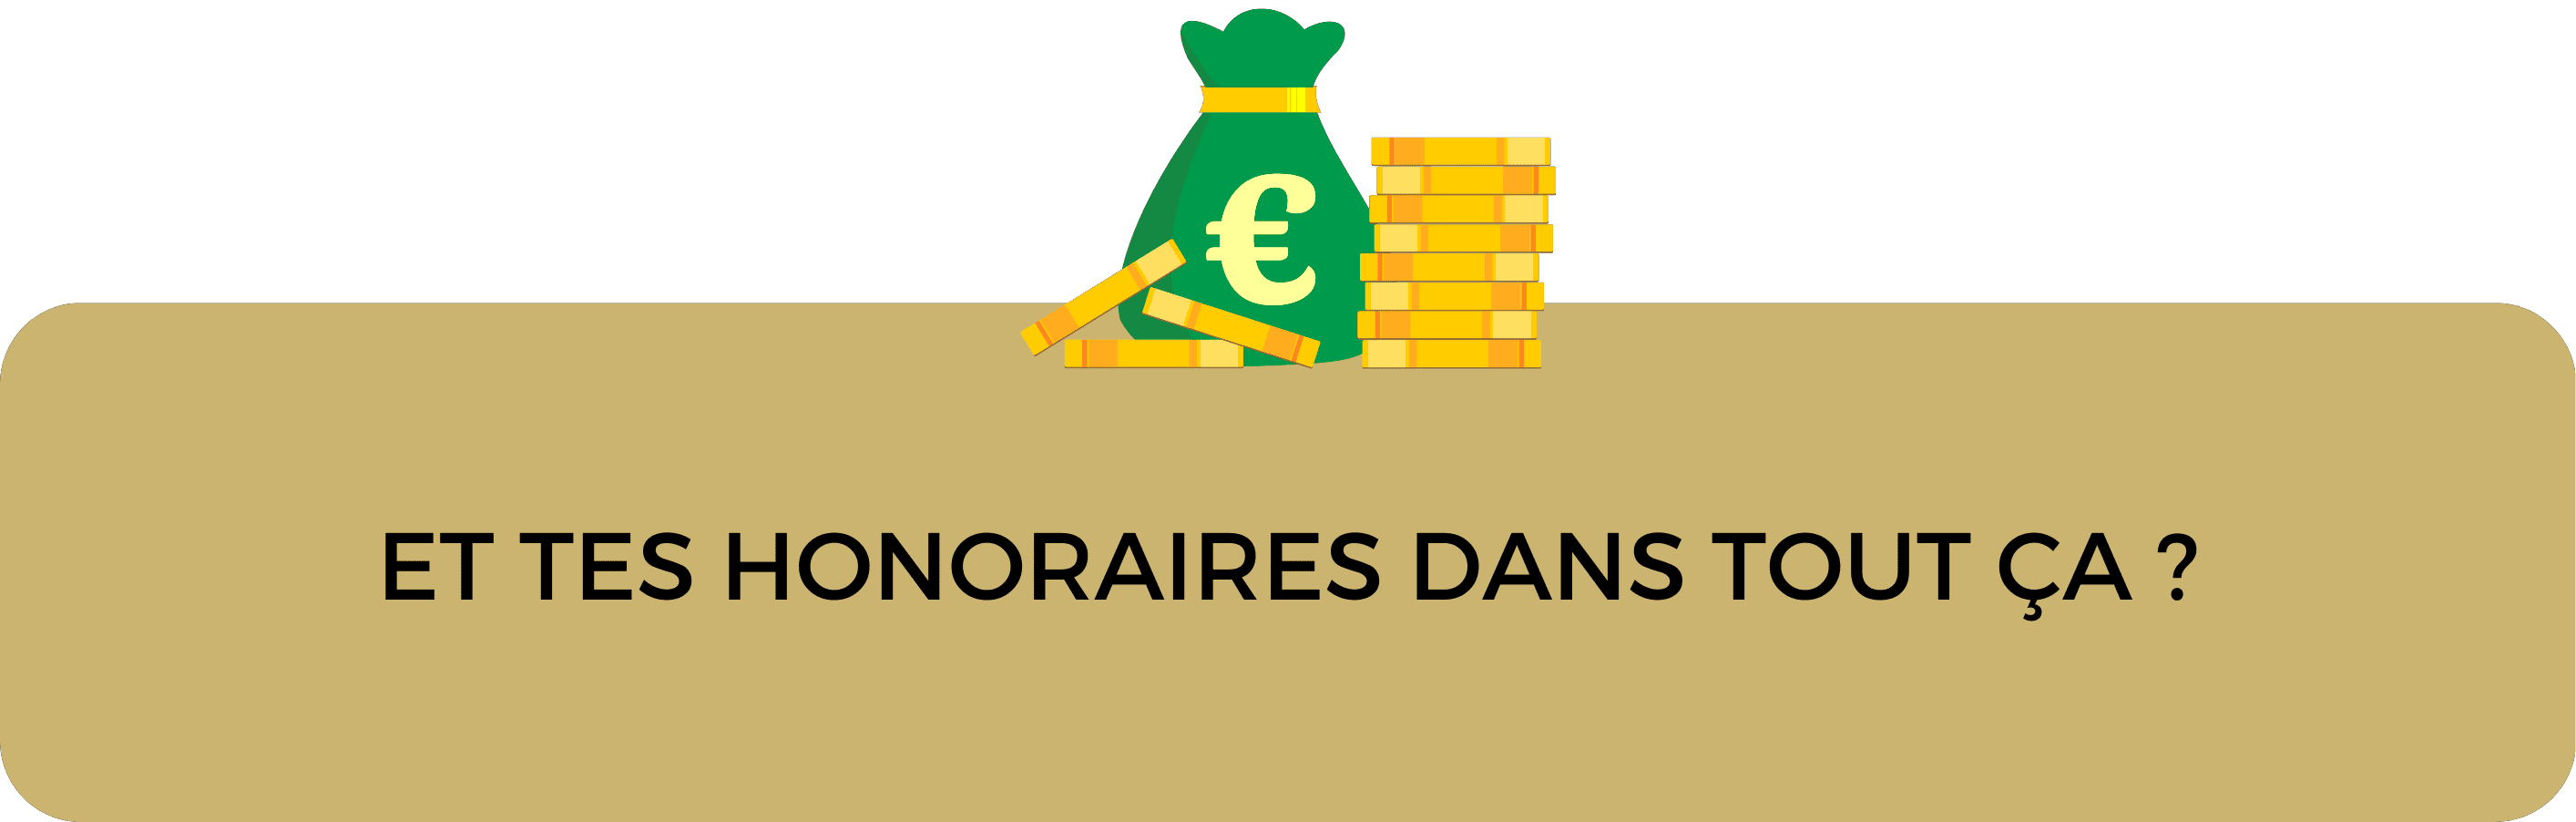 honoraires_agent_immobilier_vente_commerce